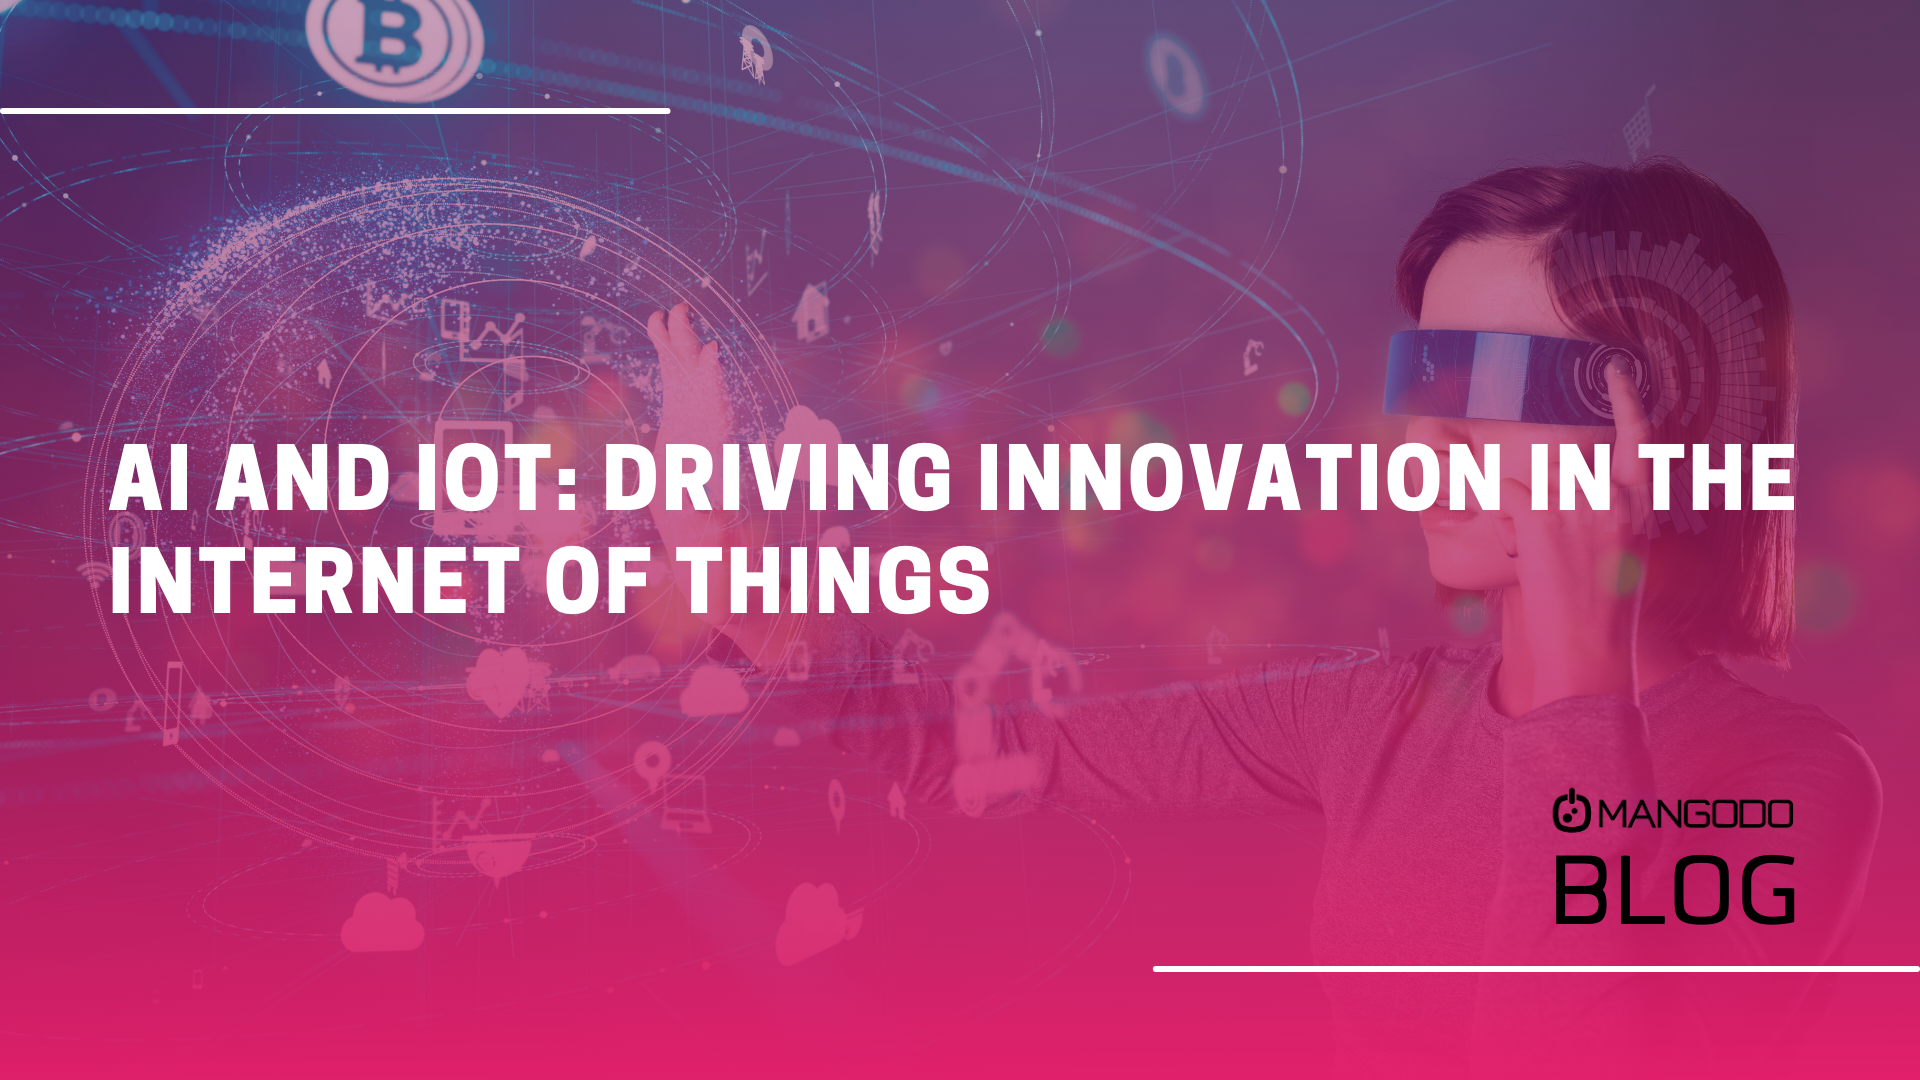 AI and IoT: Driving Innovation in the Internet of Things